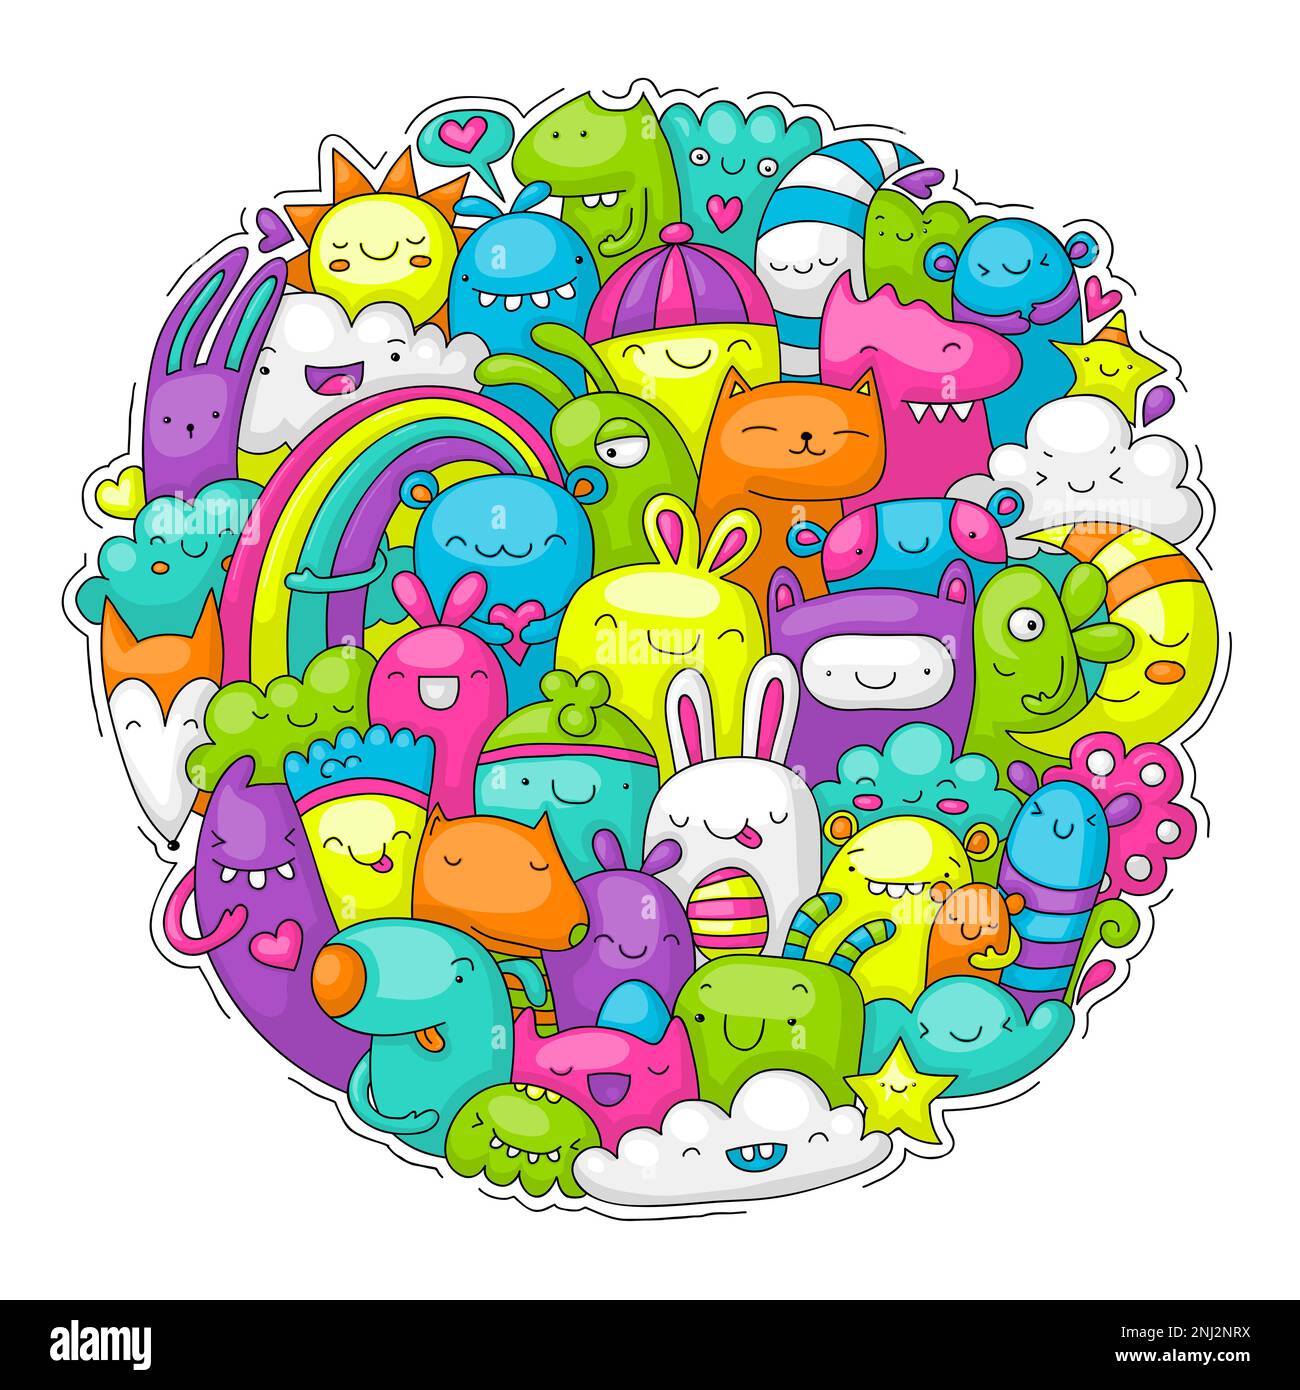 Happy bunch of colorful creatures in round shape, vector illustration Stock Photo